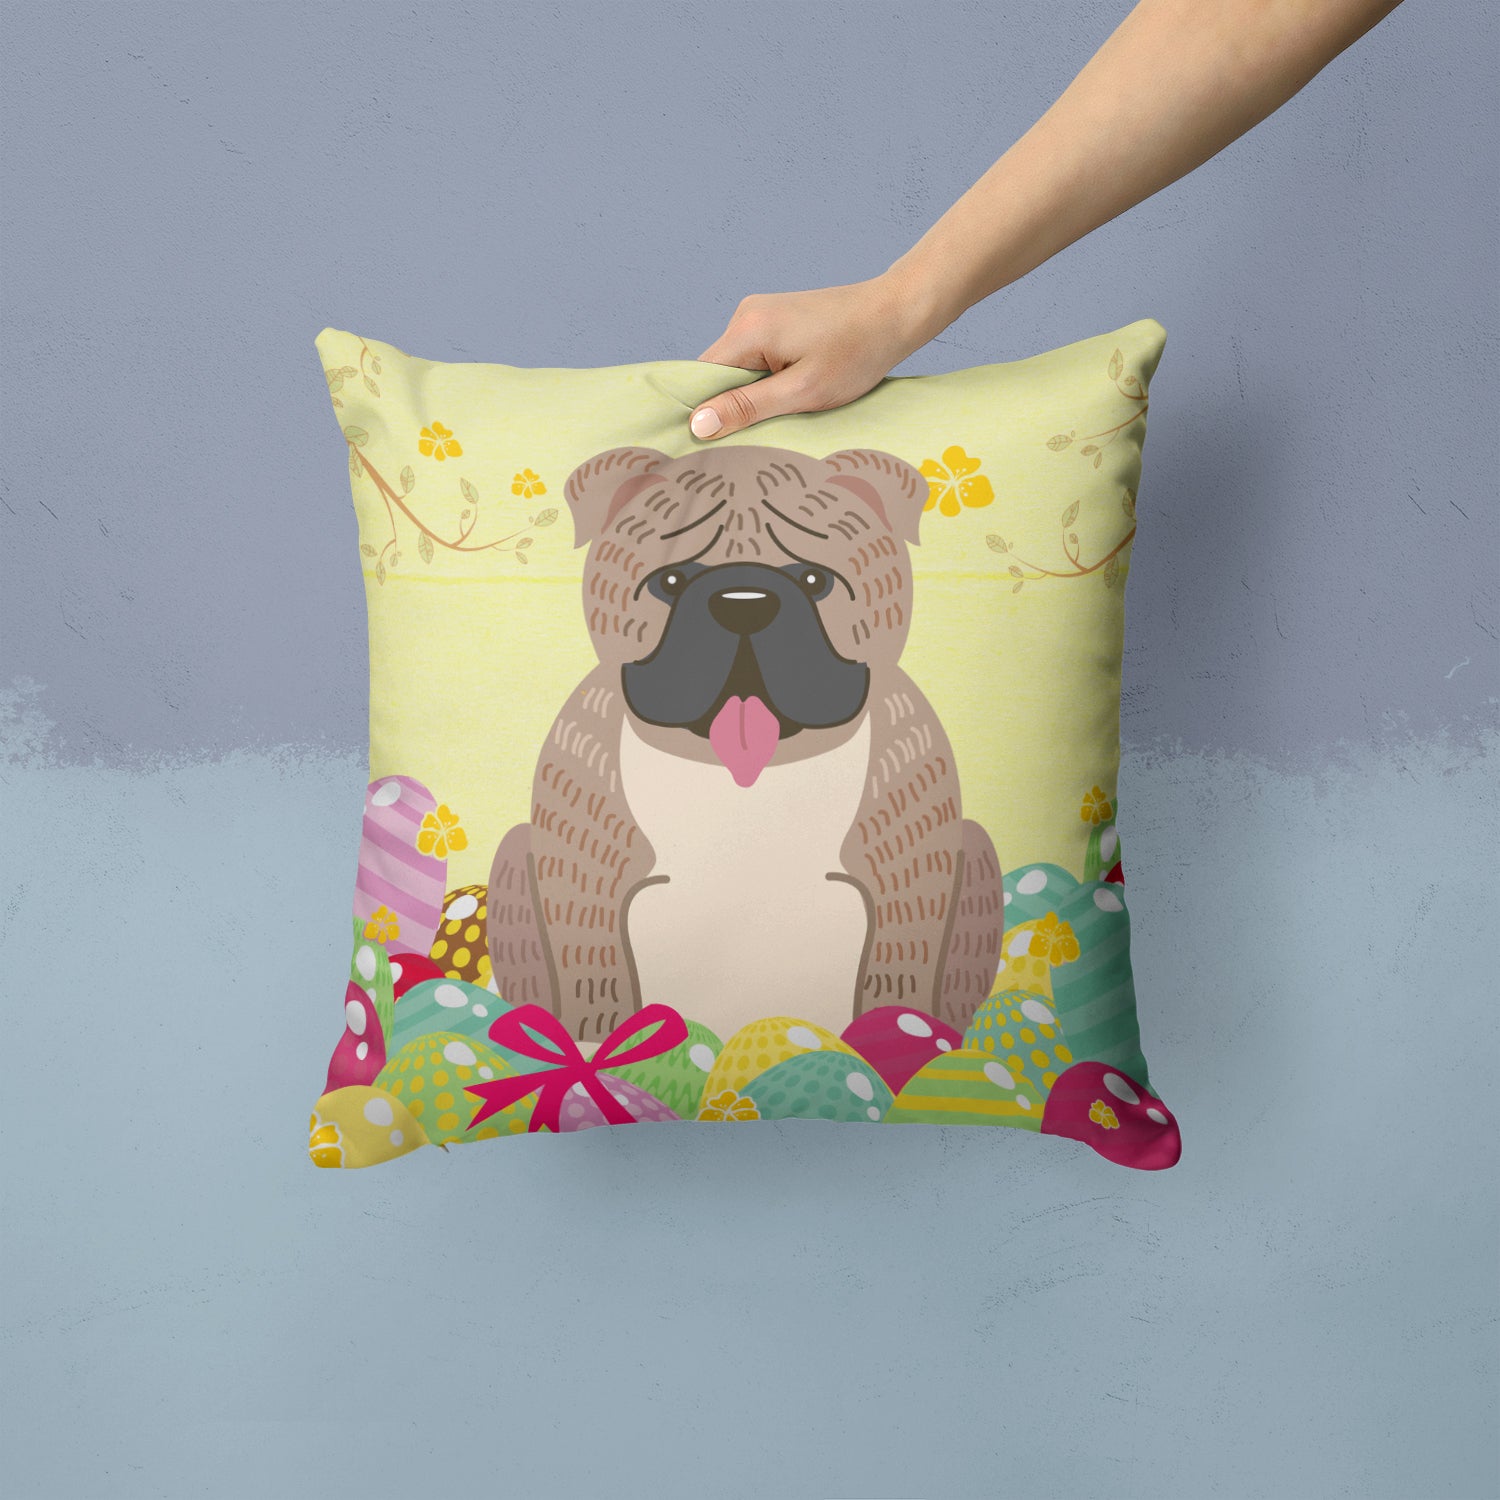 Easter Eggs English Bulldog Grey Brindle  Fabric Decorative Pillow BB6126PW1414 - the-store.com